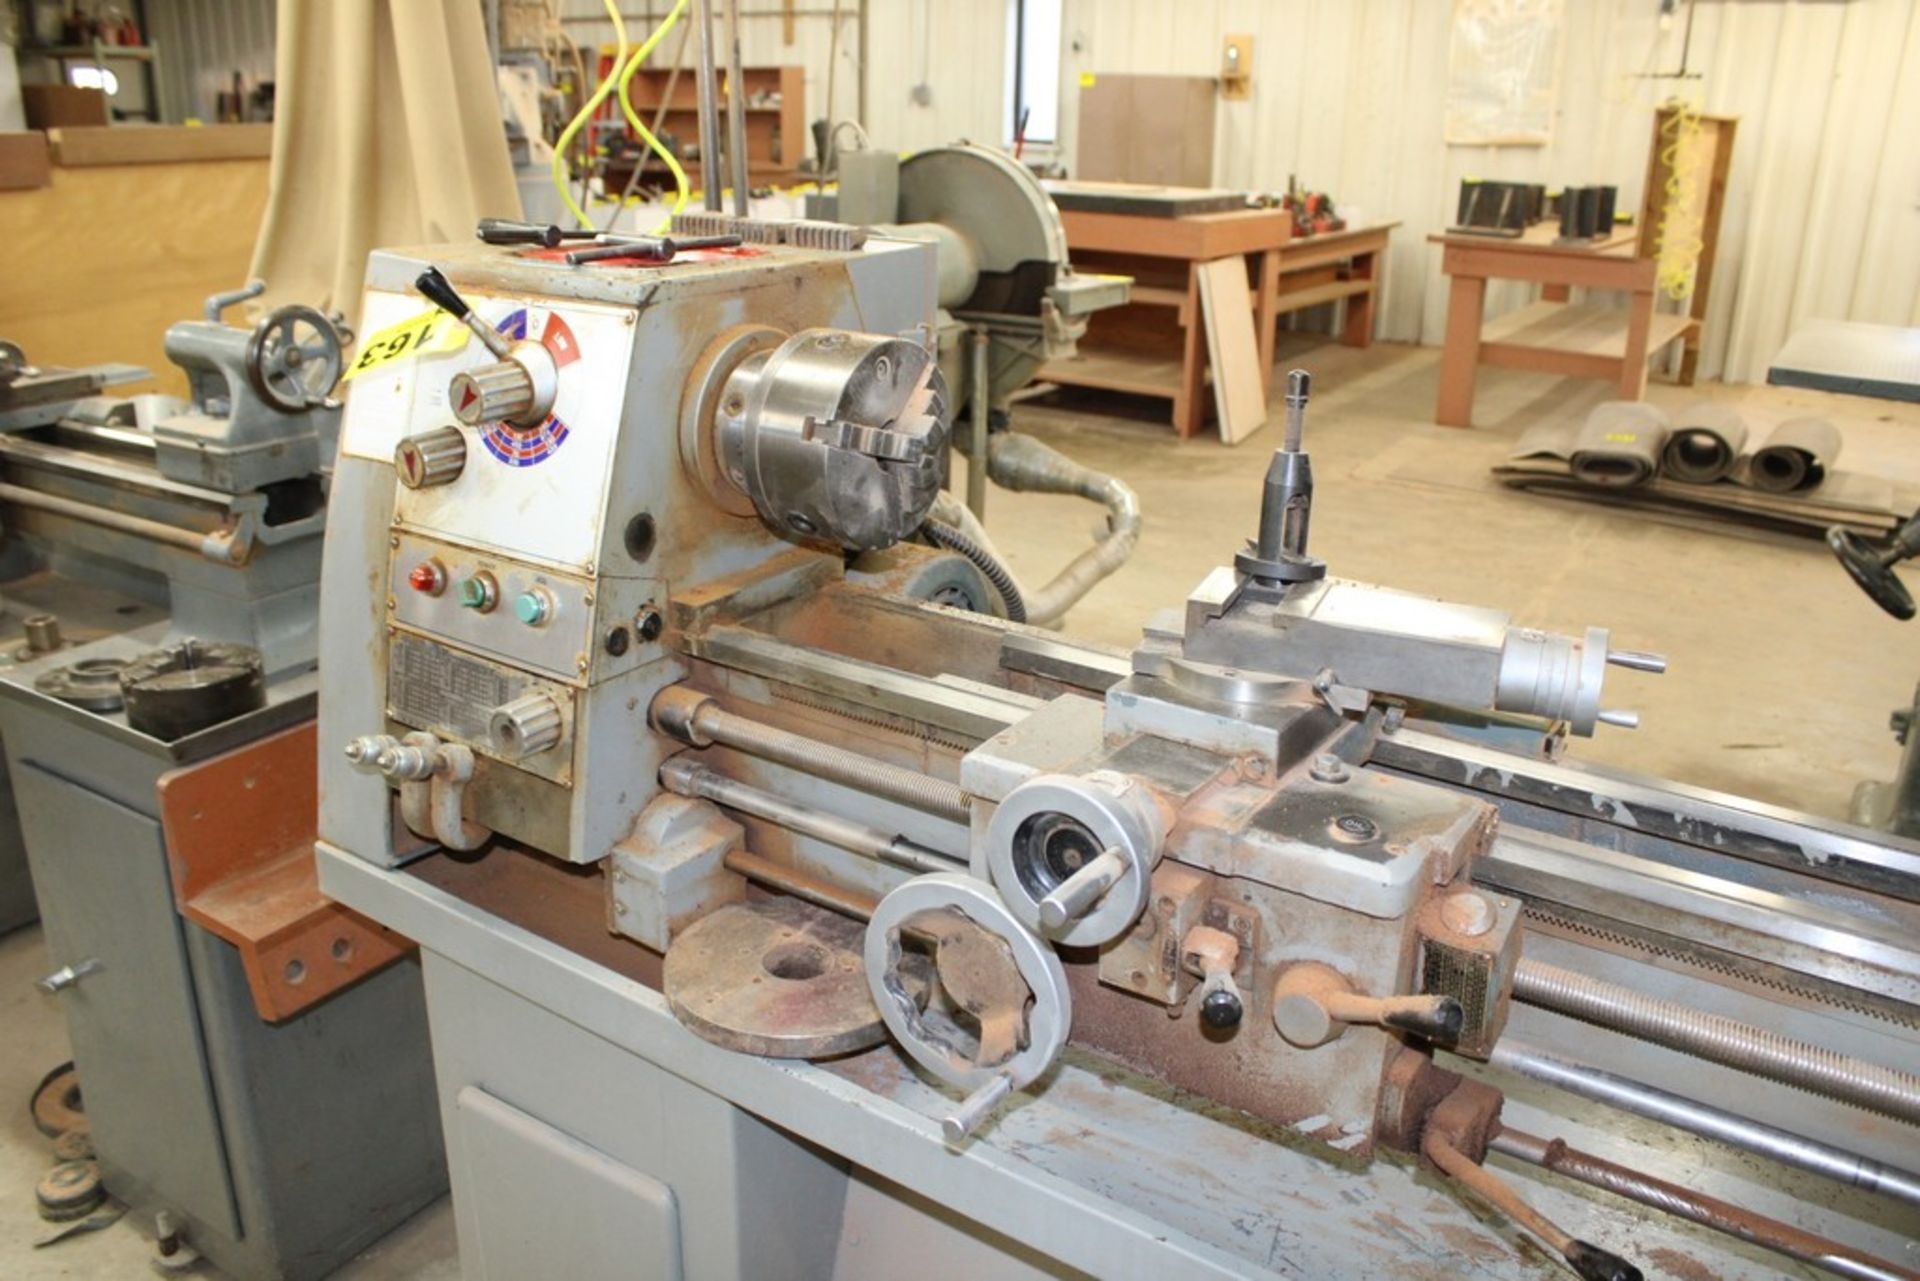 ENCO 12"X36" MODEL 110-2012 TOOLROOM LATHE, S/N 886630, 1,220 RPM SPINDLE, 3-JAW CHUCK, FACE PLATE - Image 7 of 9